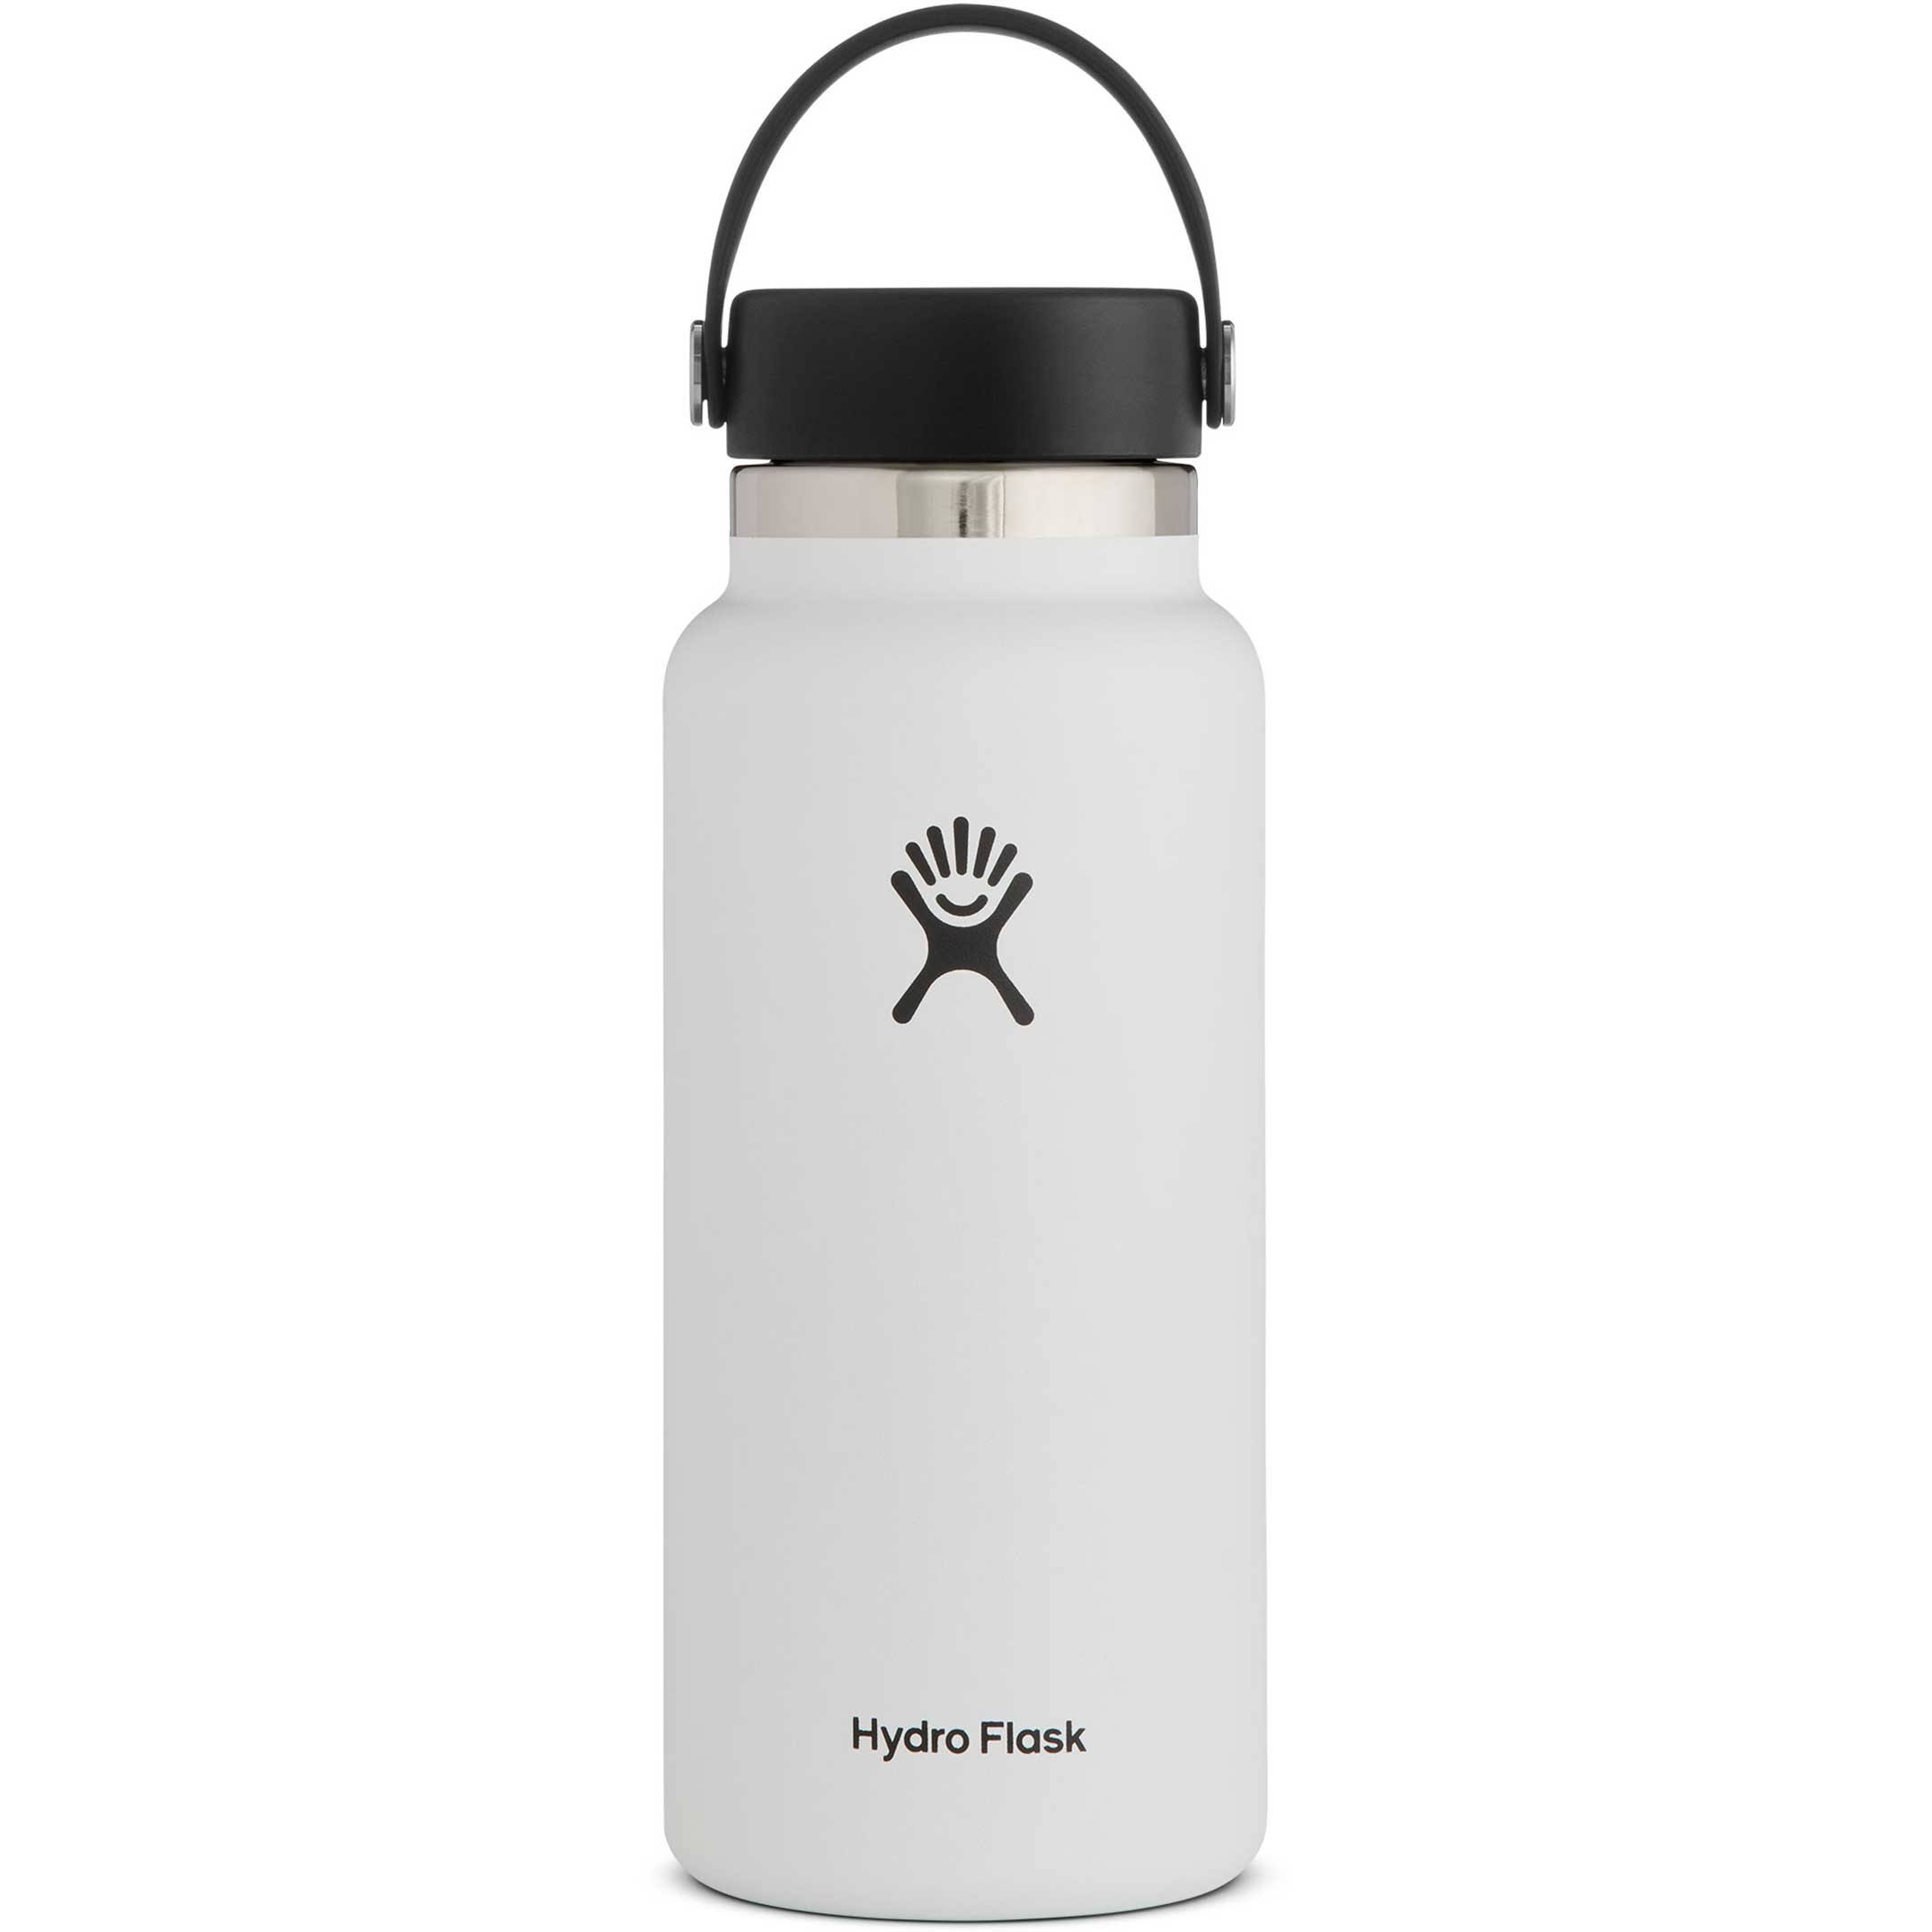 Hydro Flask 32 oz. Wide Mouth Bottle - White